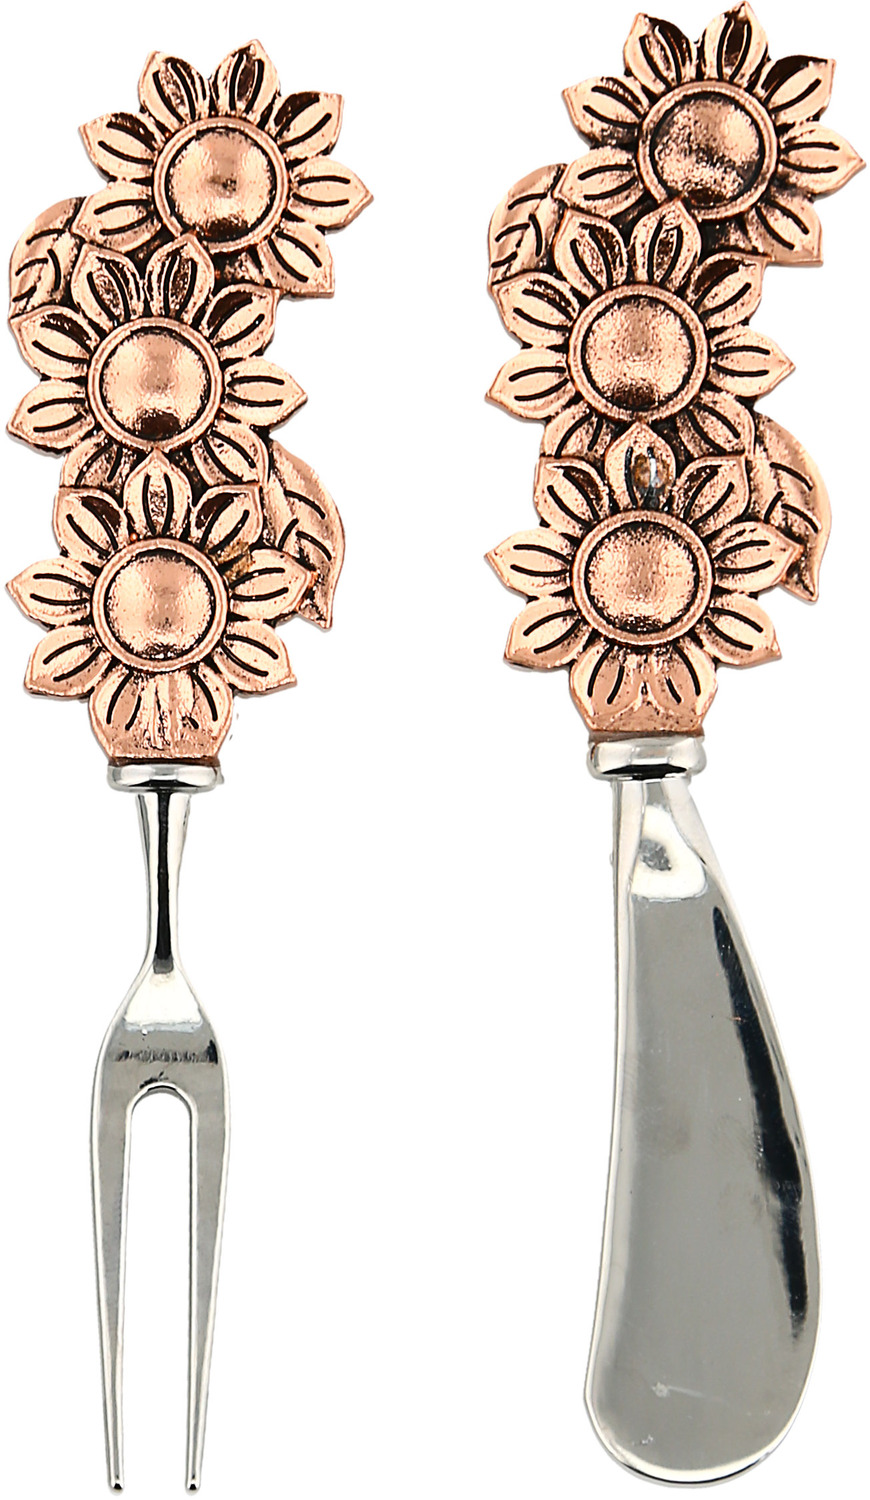 Floral by Hostess with the Mostess - Floral - Charcuterie 2 Piece Utensil Set